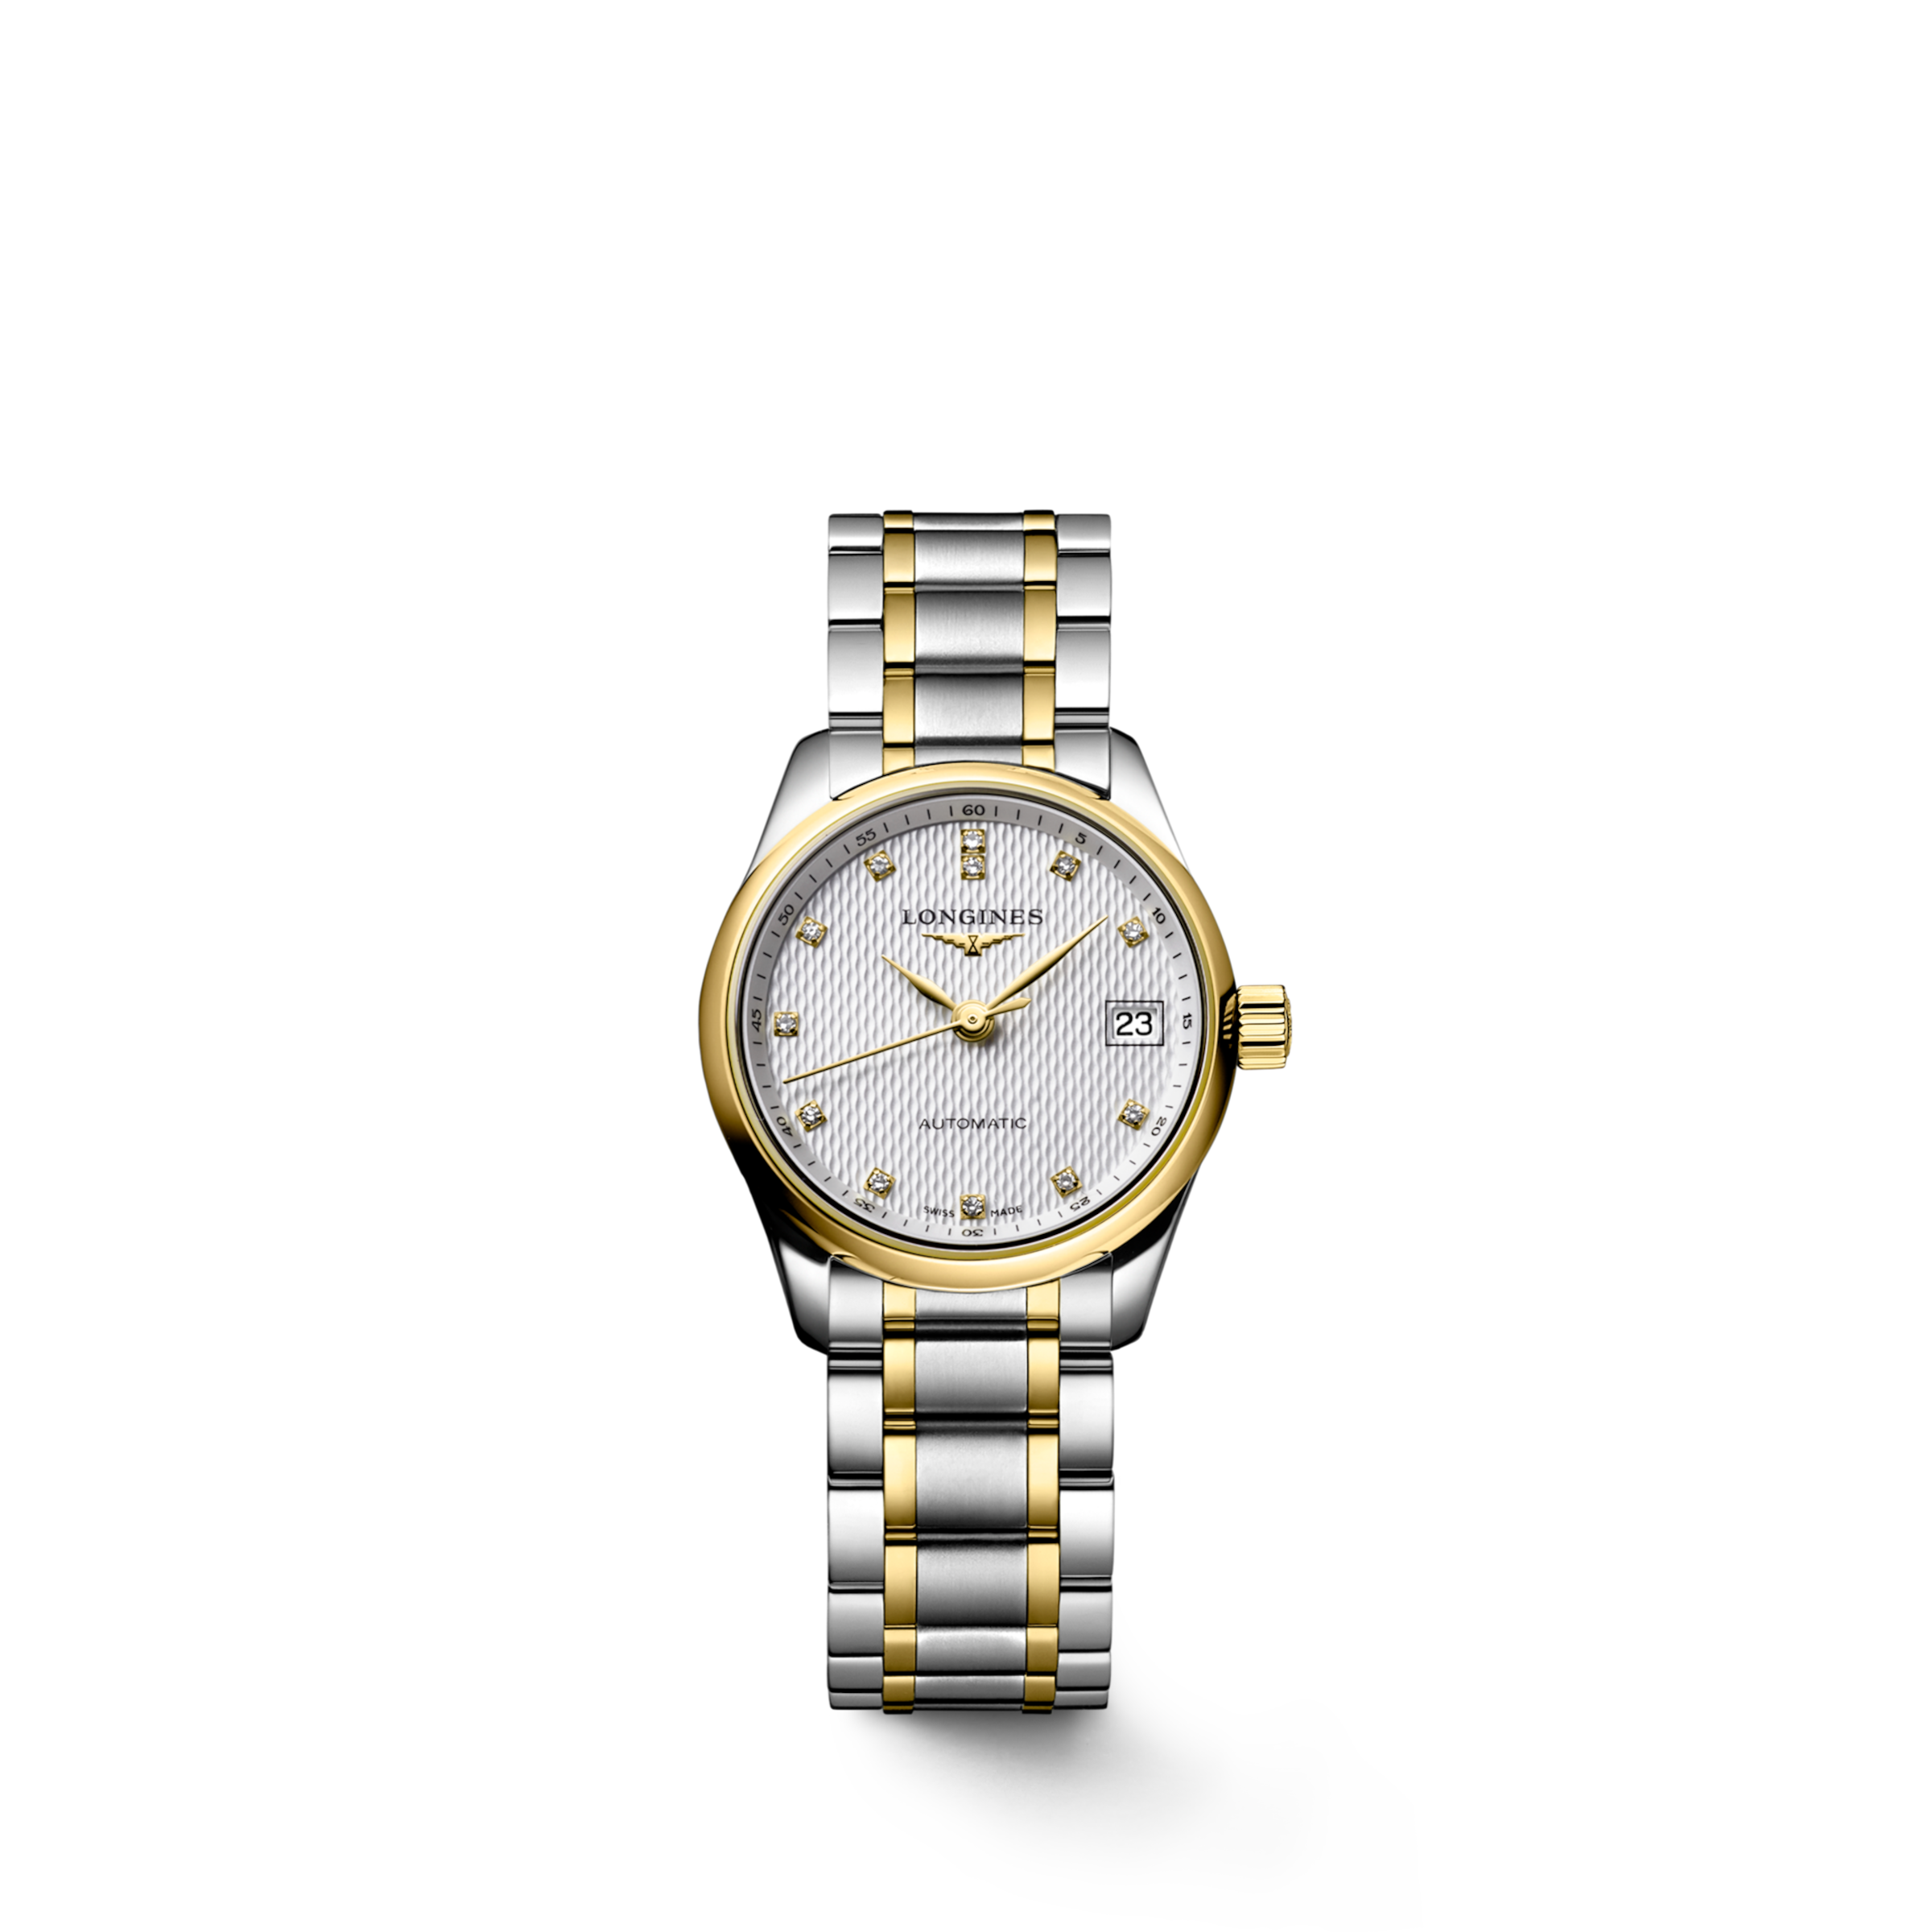 Longines MASTER COLLECTION Automatic Stainless steel and 18 karat yellow gold Watch - L2.128.5.77.7